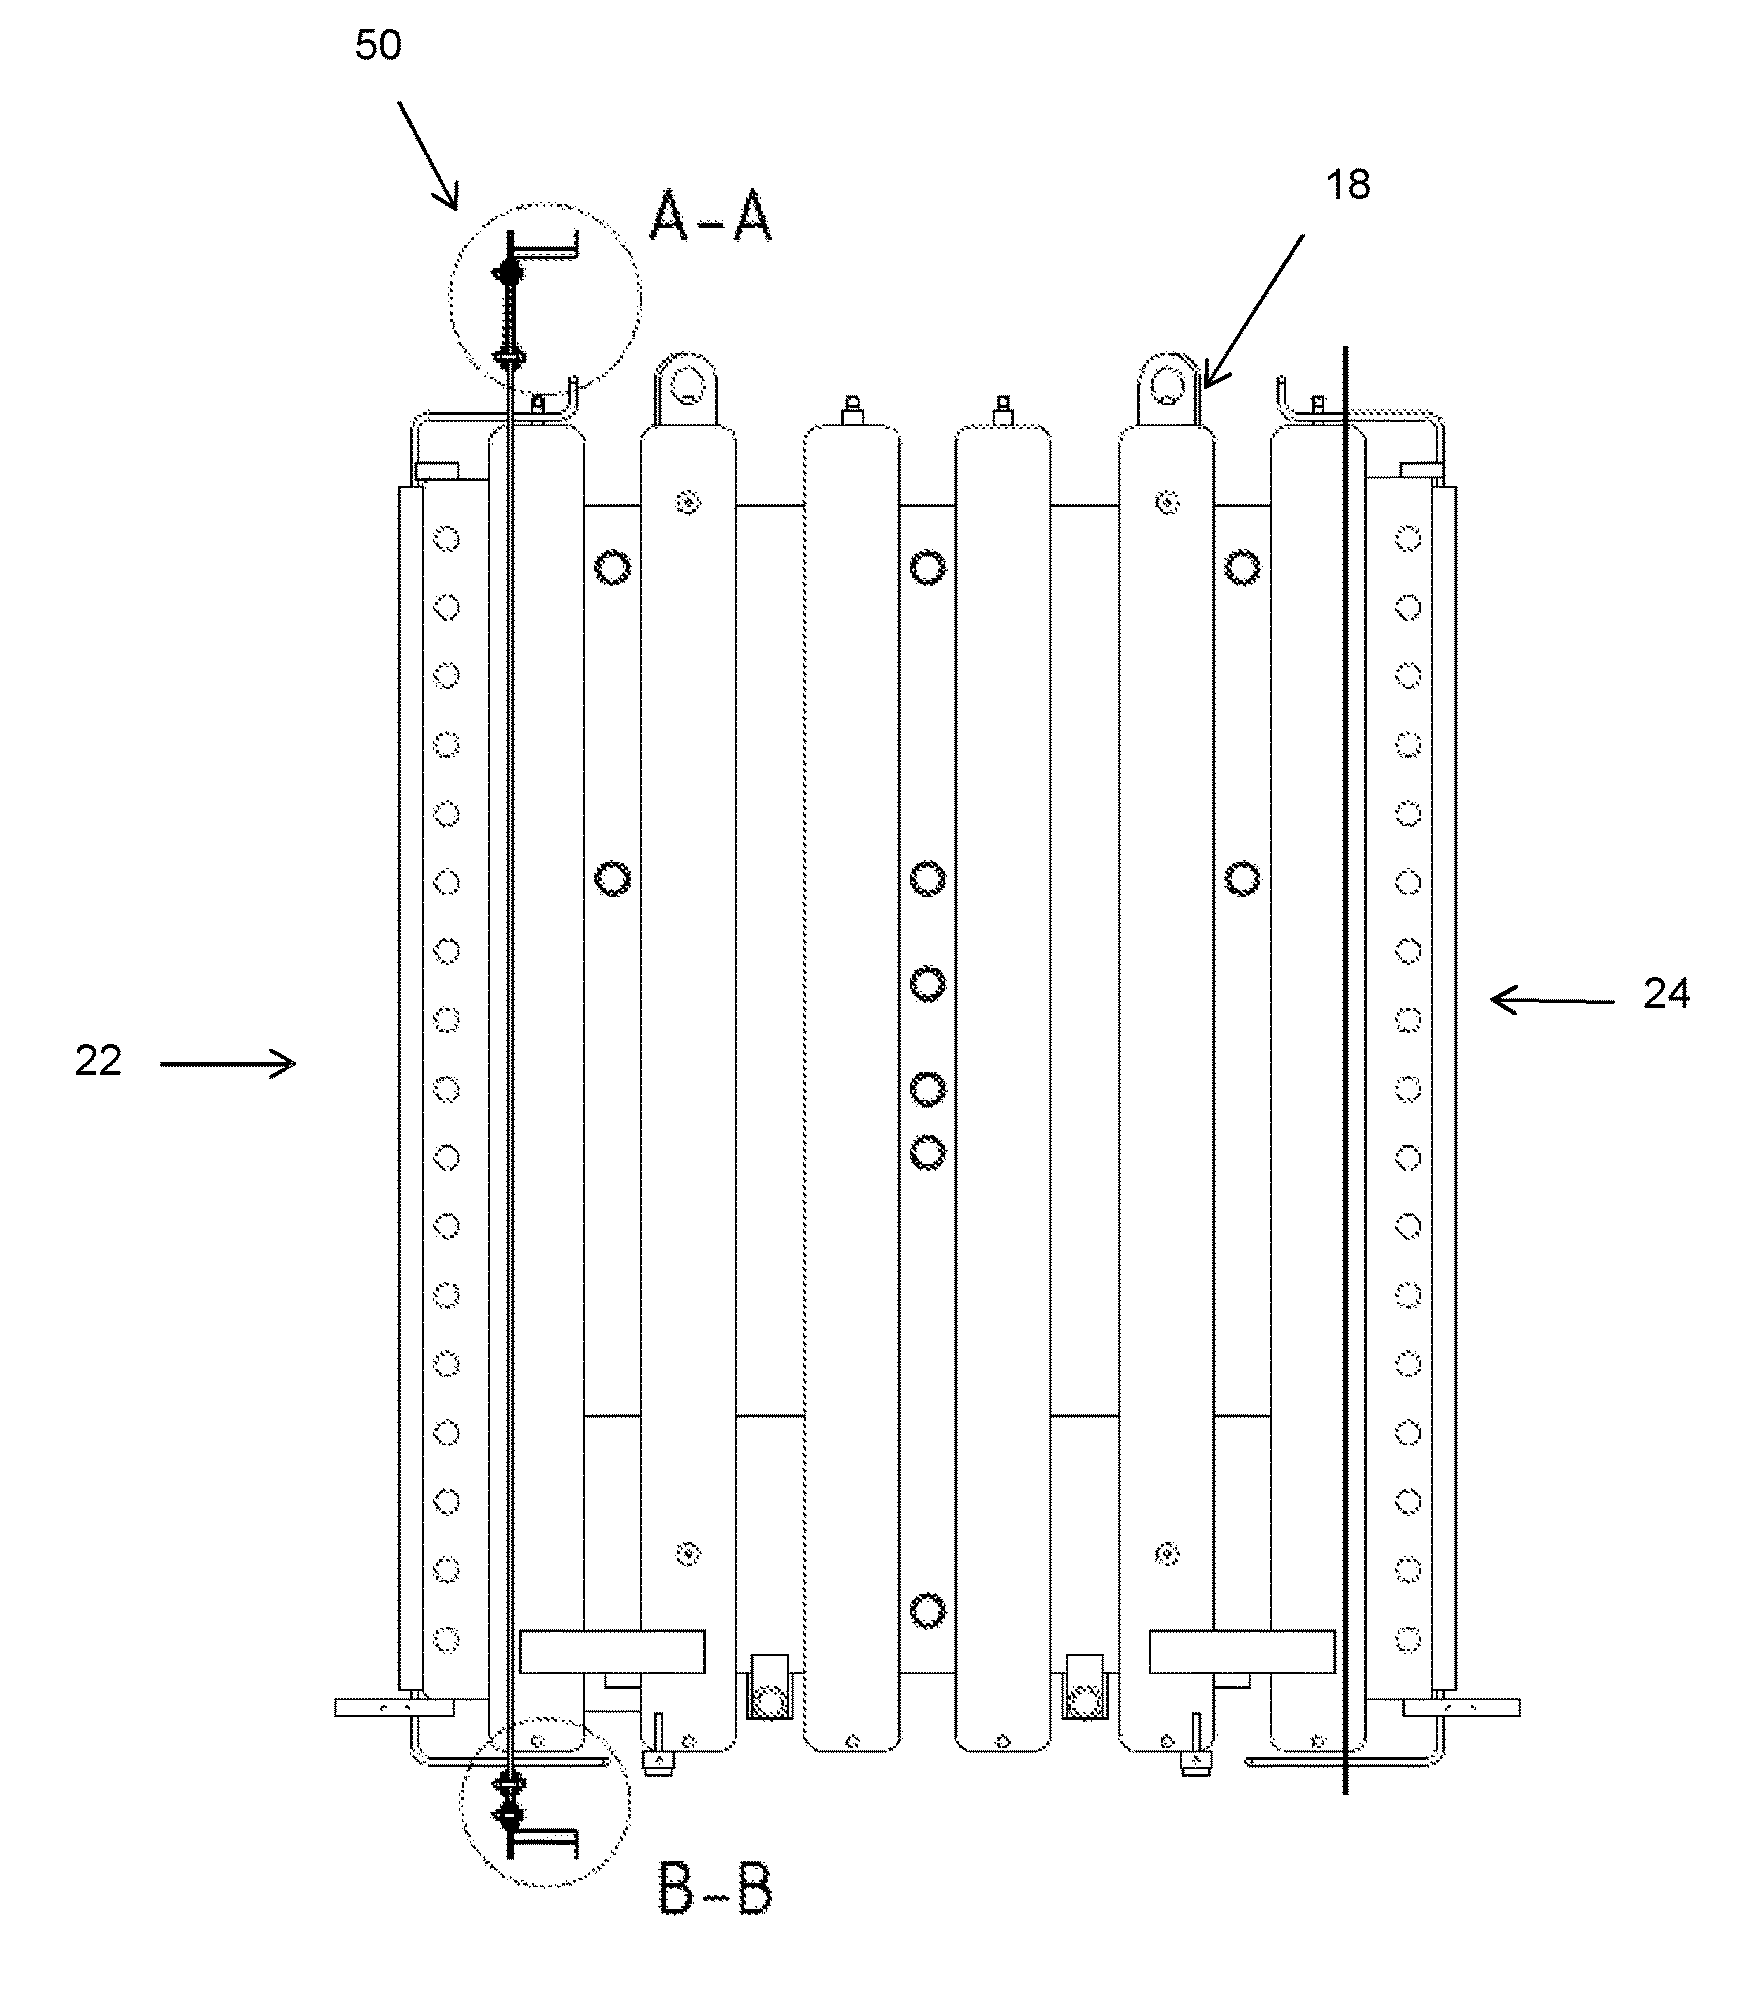 Apparatus and method for sealing zones or rooms